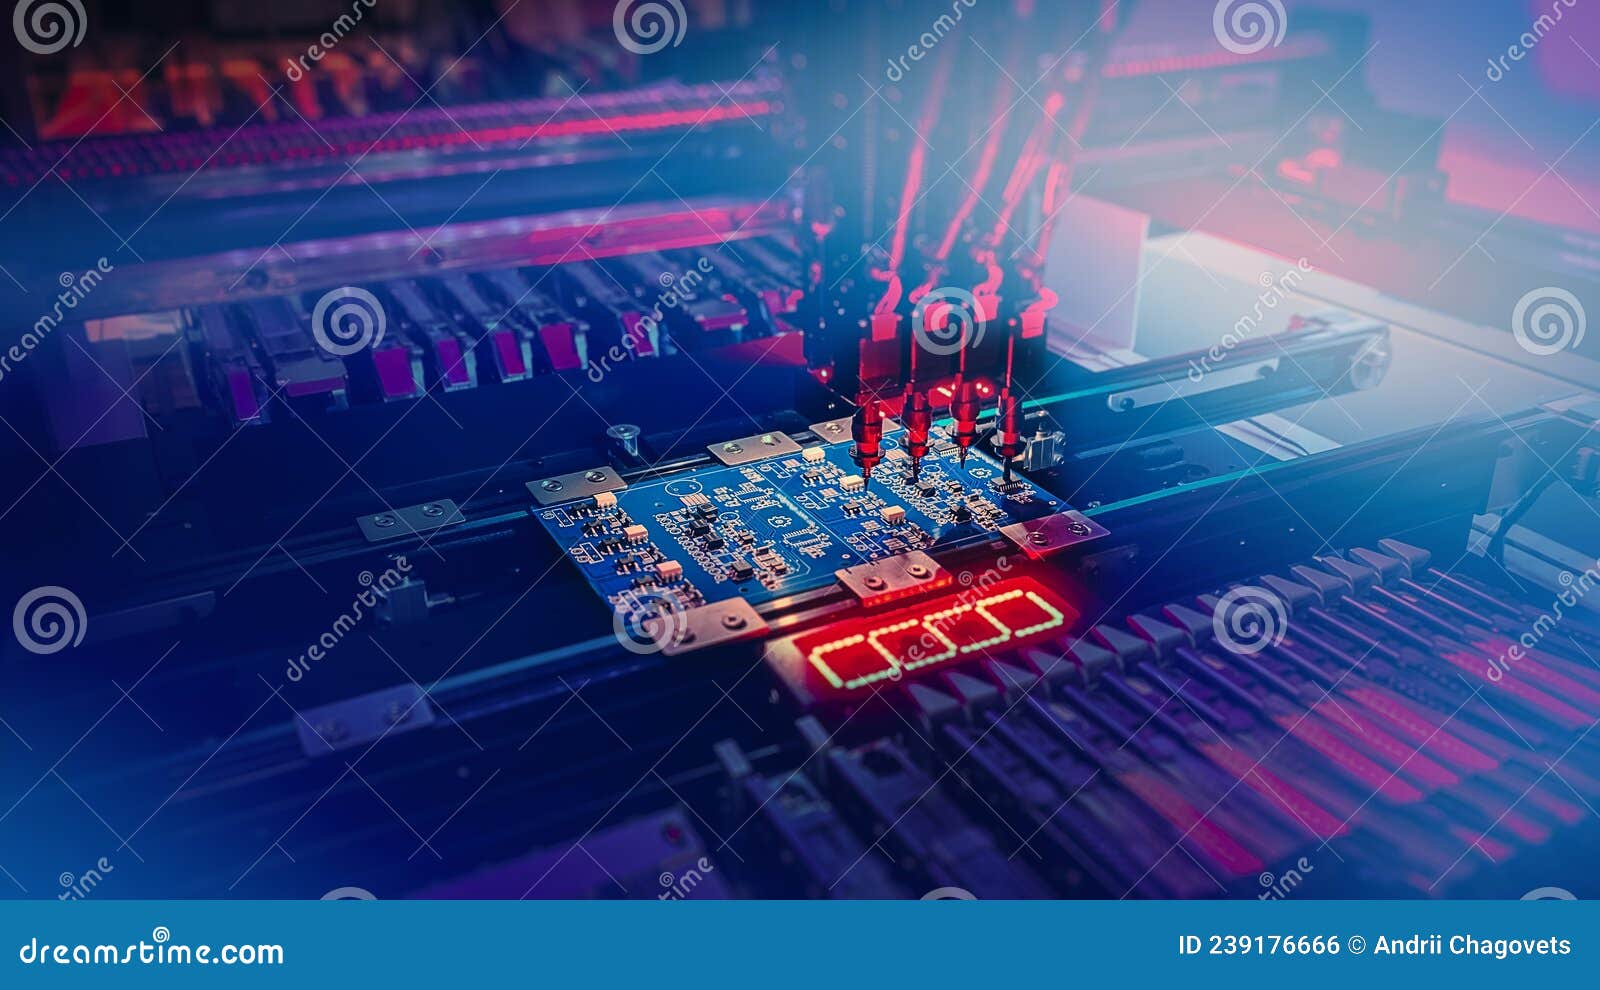 electronic production of computer chips by smt pick and place machine with machine vision system